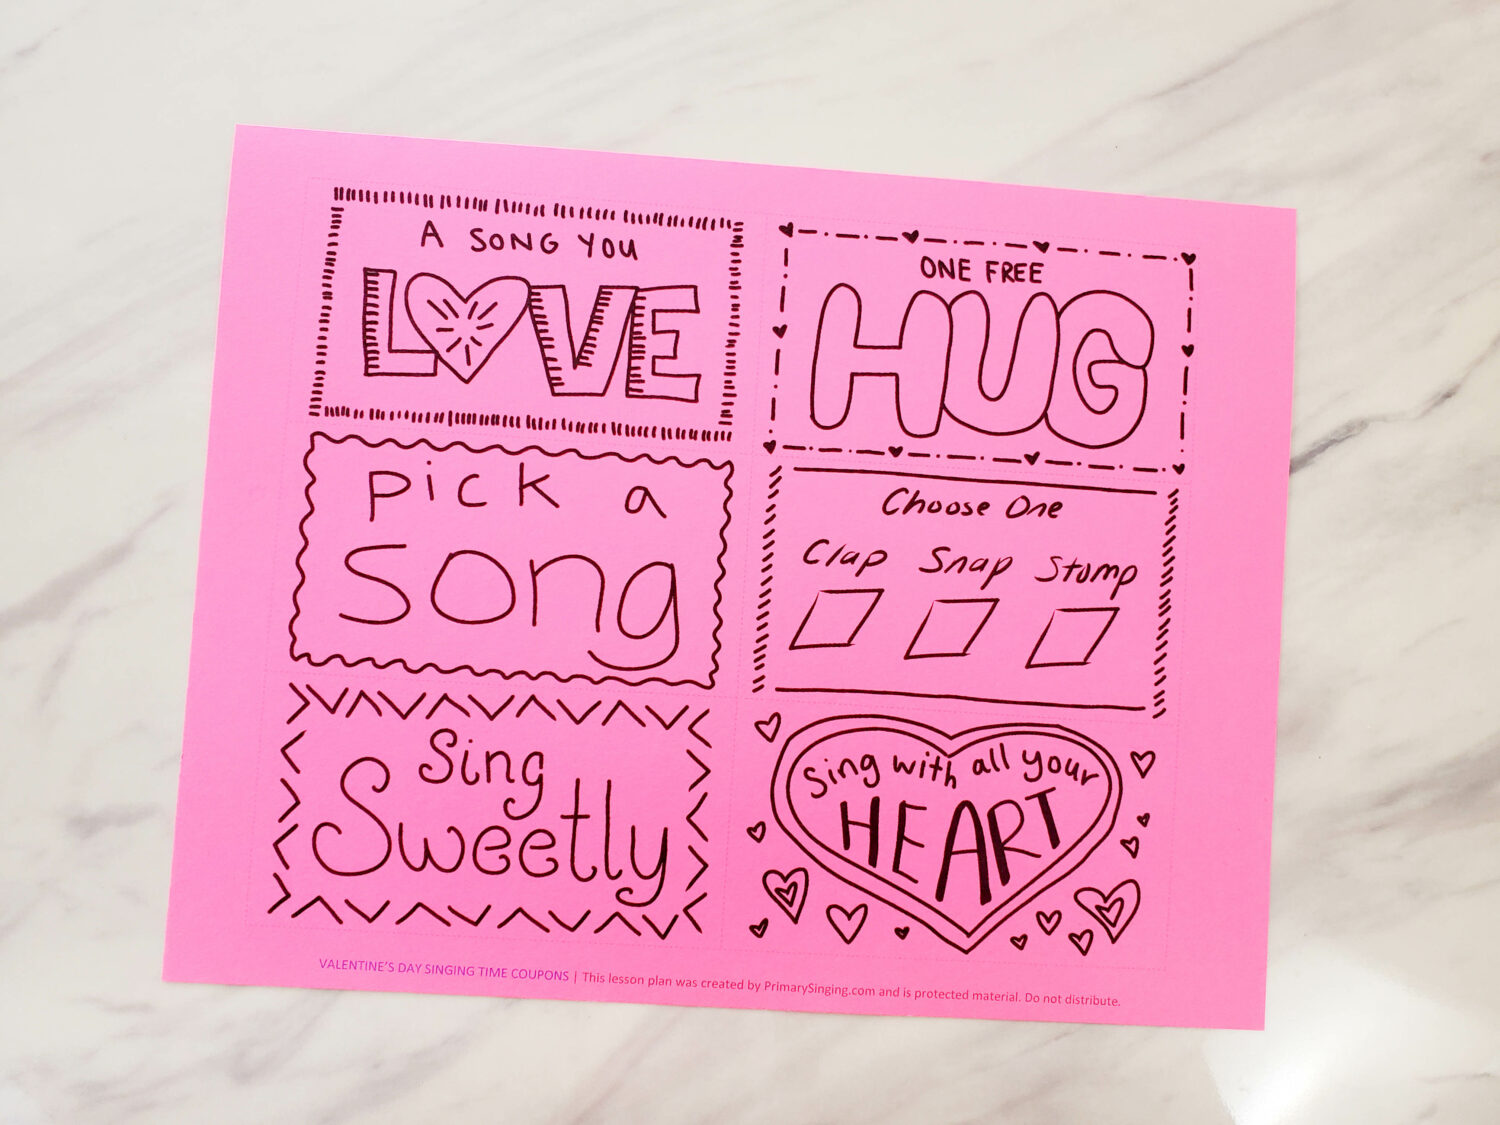 Valentine's Day Singing Time Coupons fun interactive way to sing through songs as you find different coupons to redeem to add a fun way to sing or action! Printable song helps for LDS Primary music leaders.